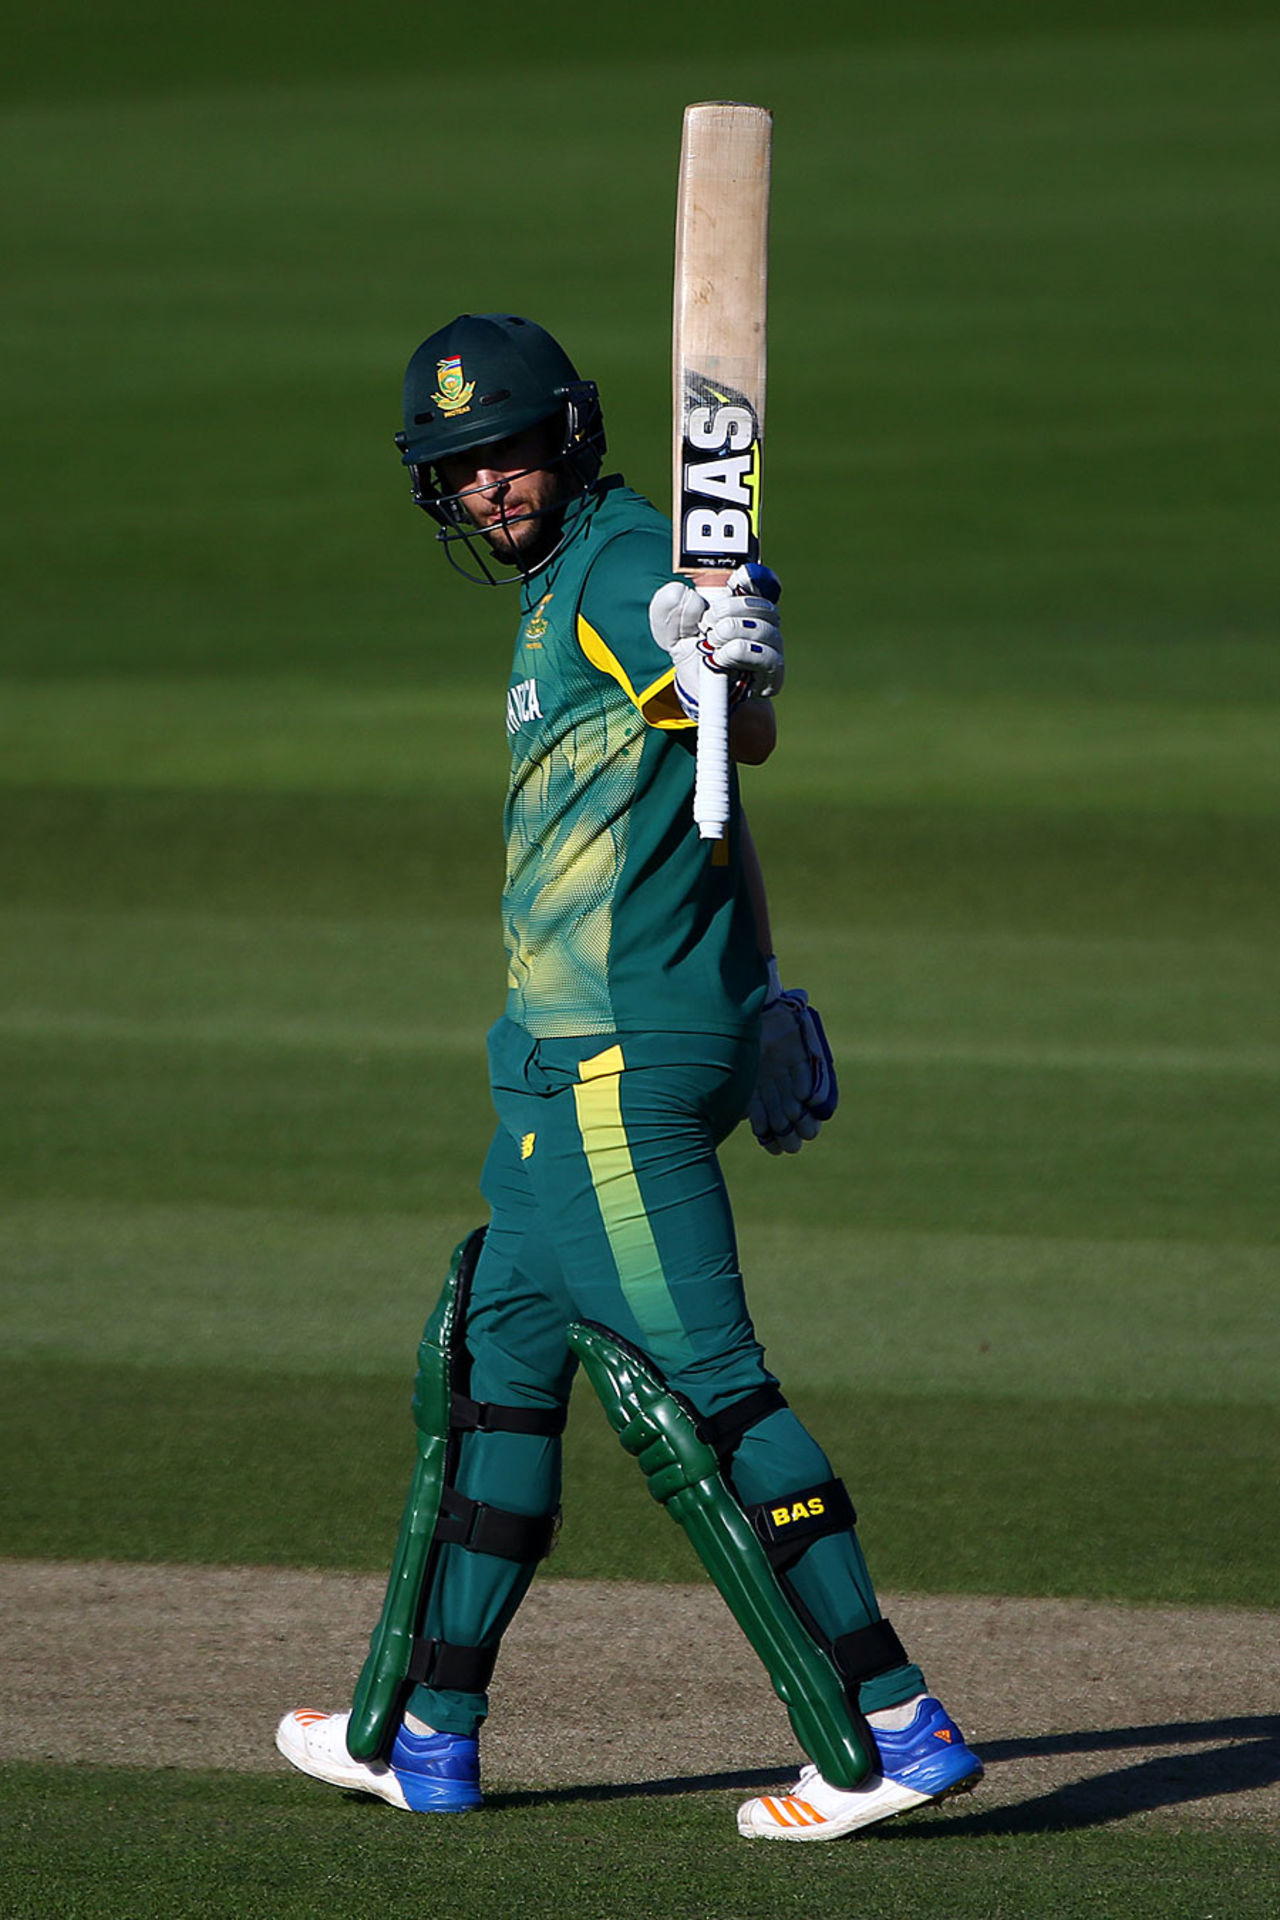 Wayne Parnell made a half-century opening the innings, Sussex v South Africans, Tour match, Hove, May 19, 2017